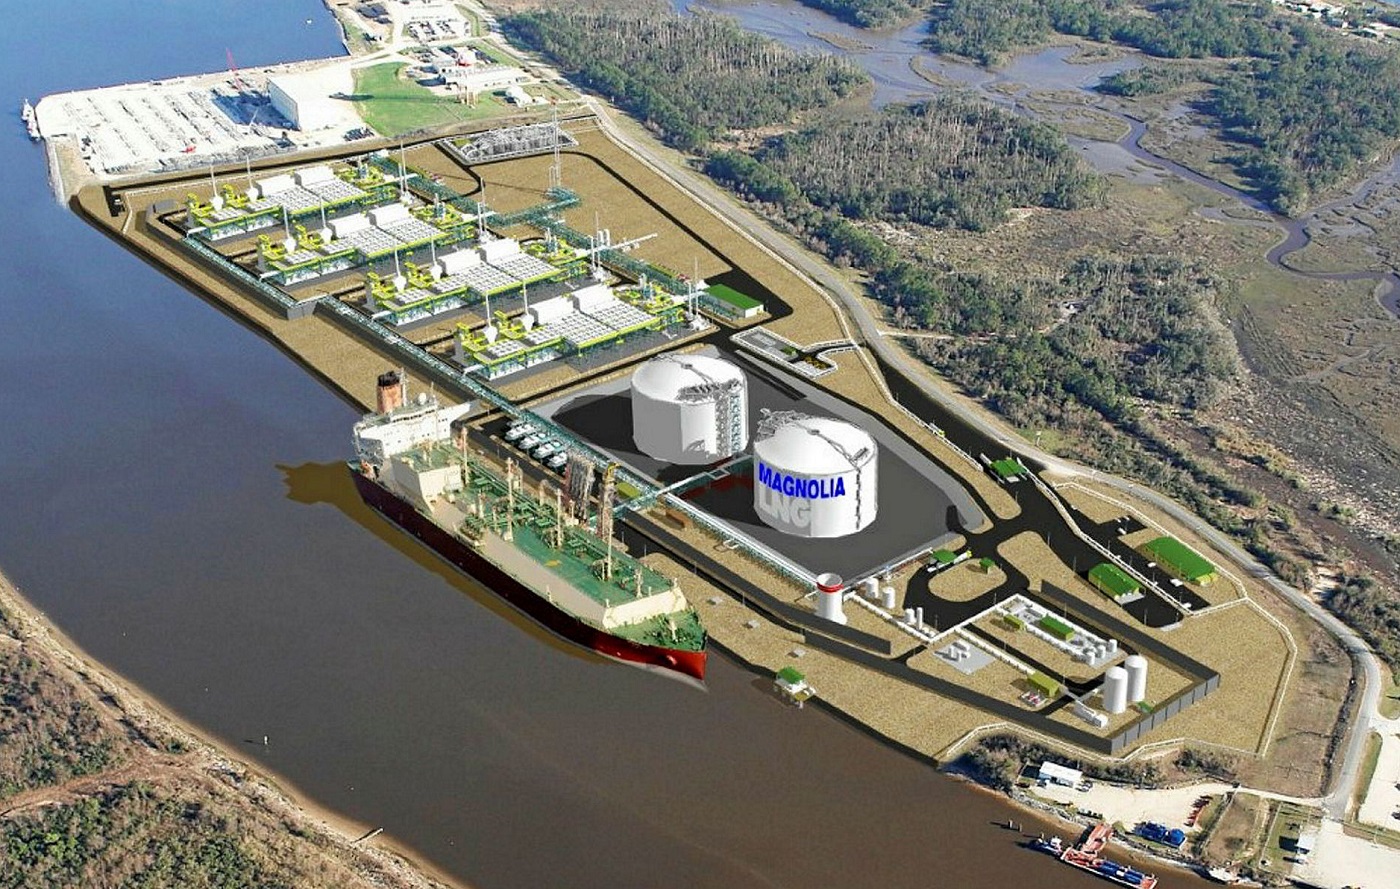 Magnolia LNG authorised to export additional LNG volumes